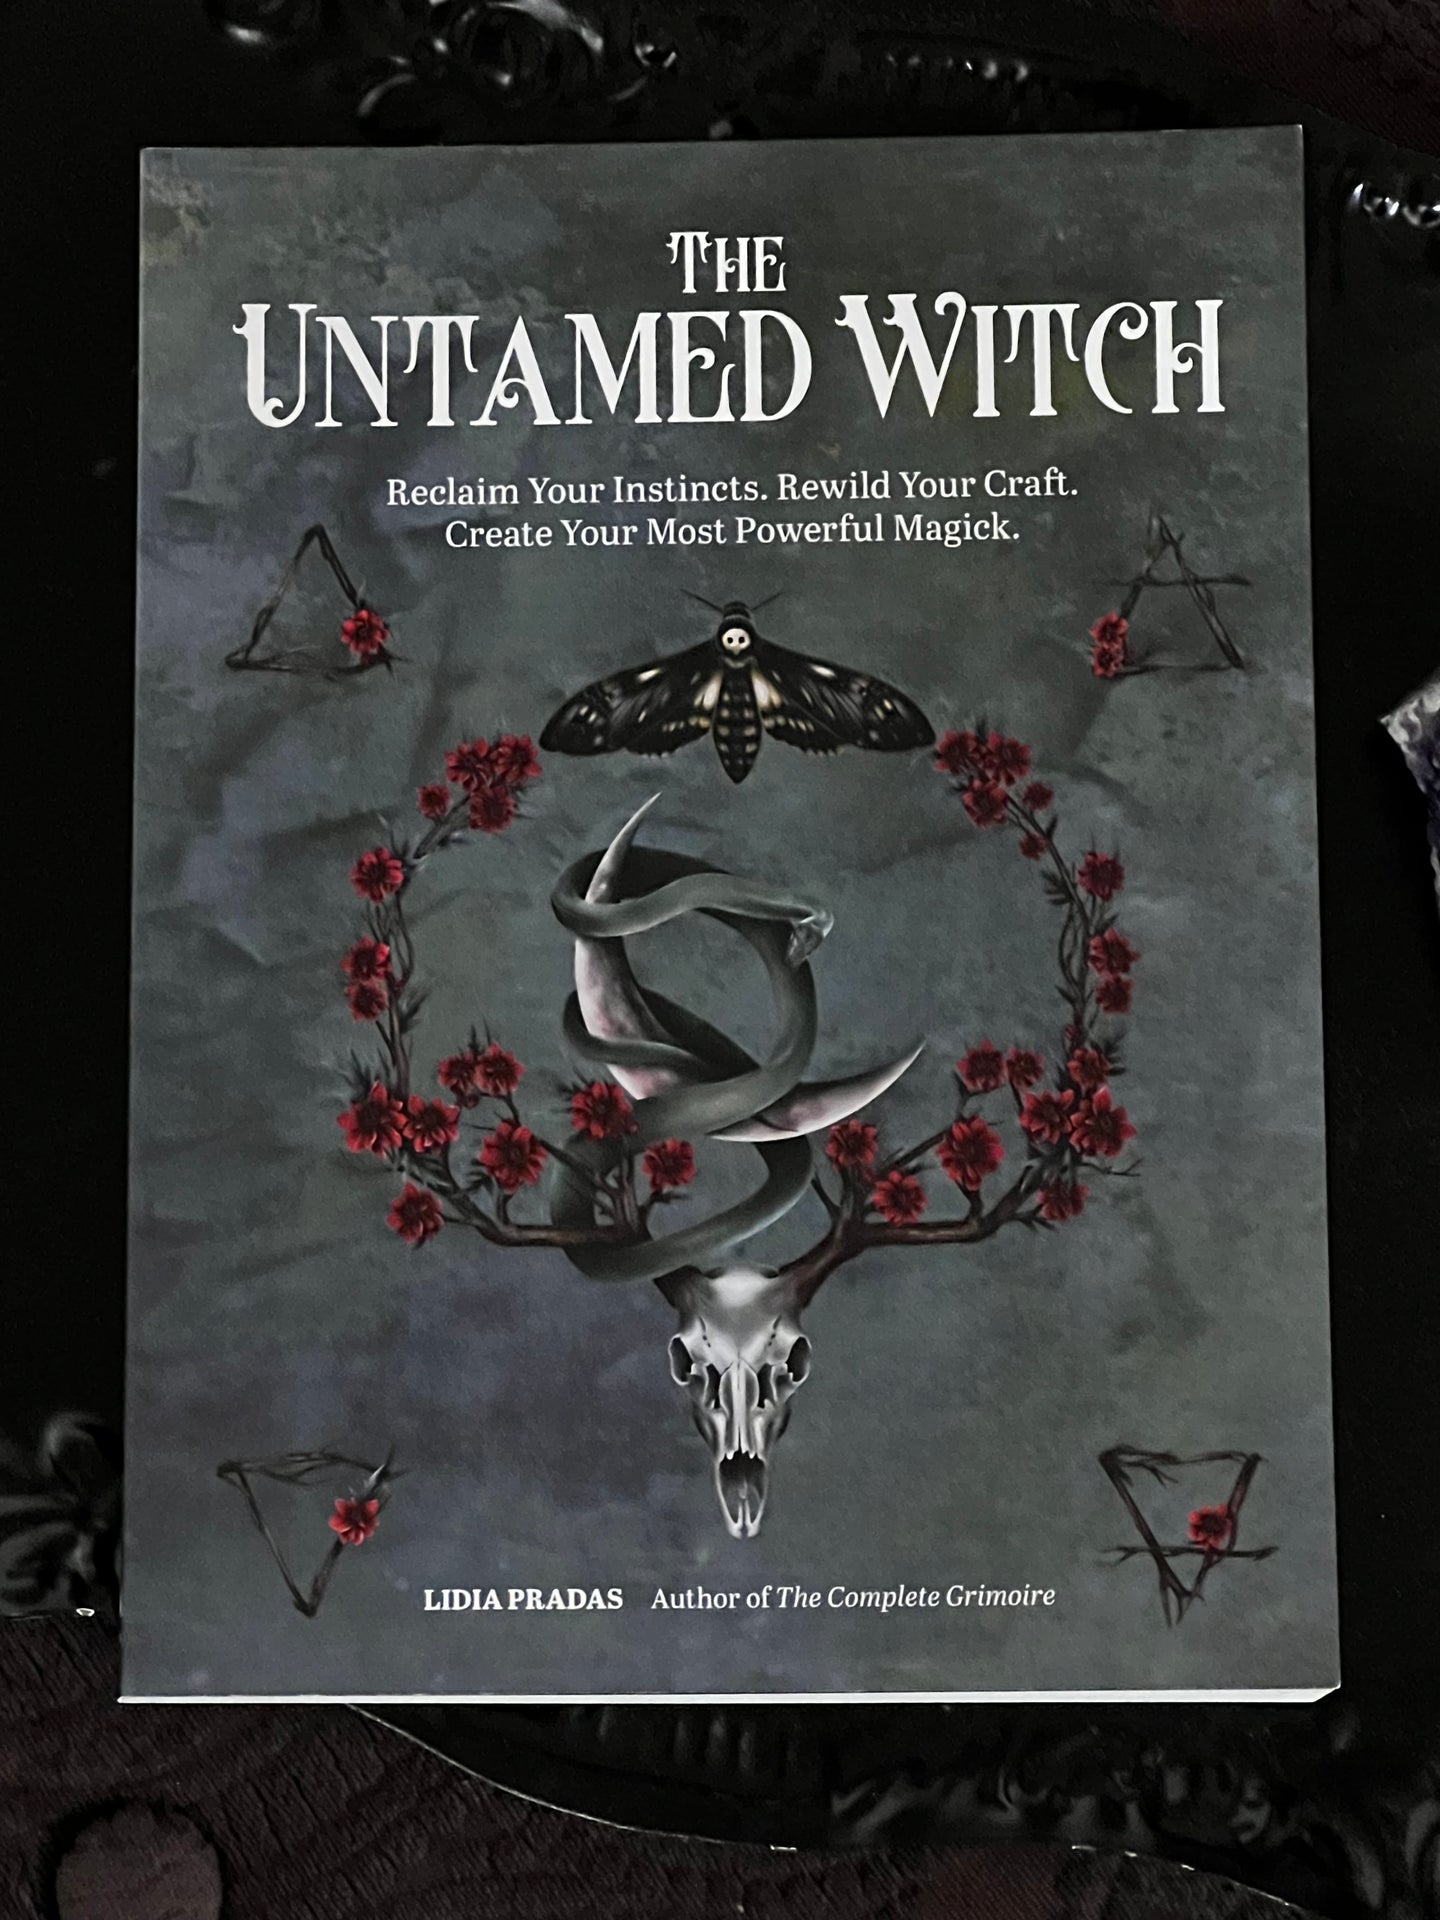 The Untamed Witch Reclaim Your Instincts, Rewild your Craft, Create Your Most Powerful Magick